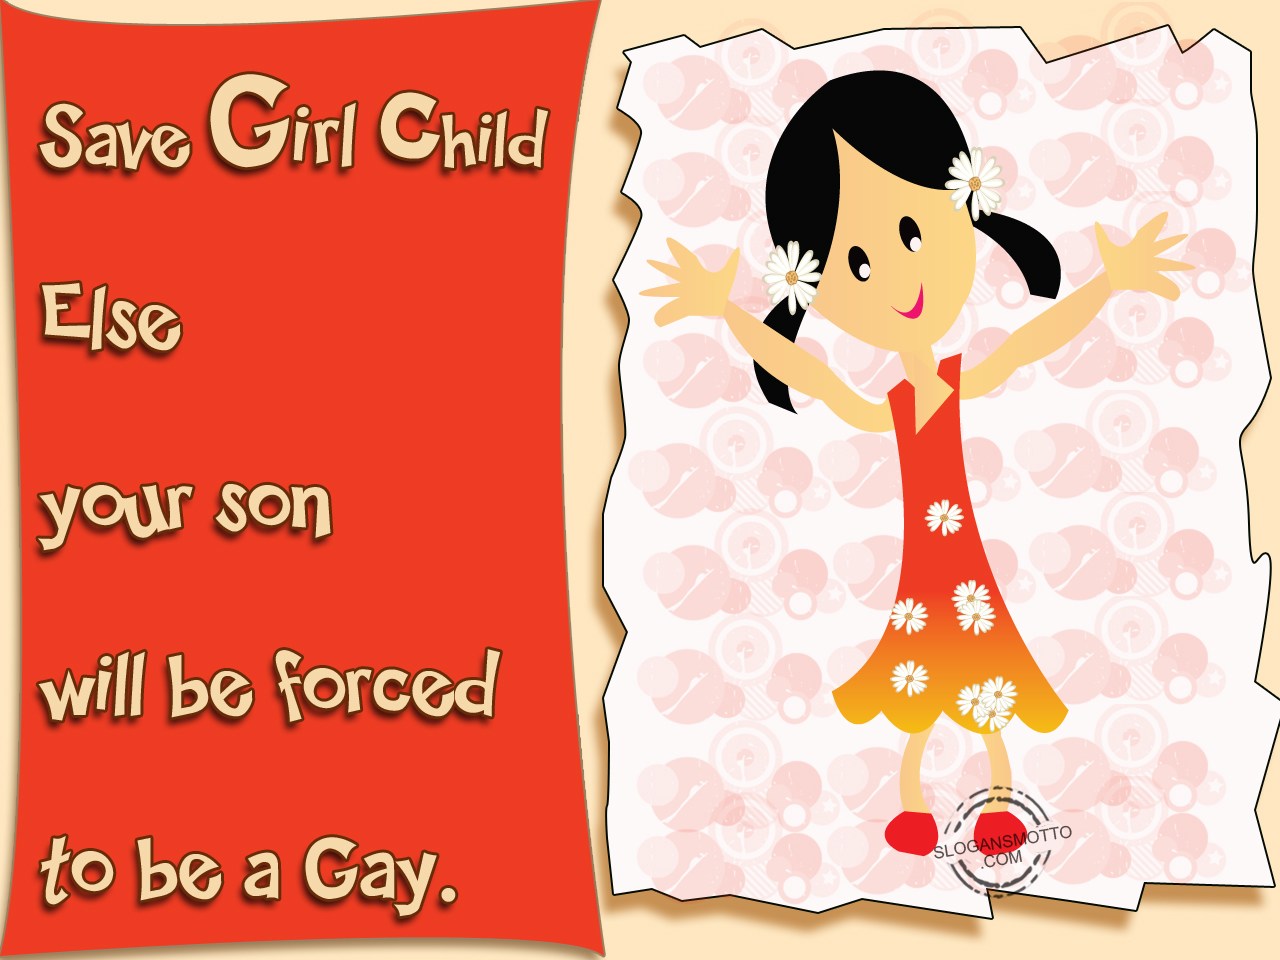 Save girl child else your son will be forced to ... | SlogansMotto.com